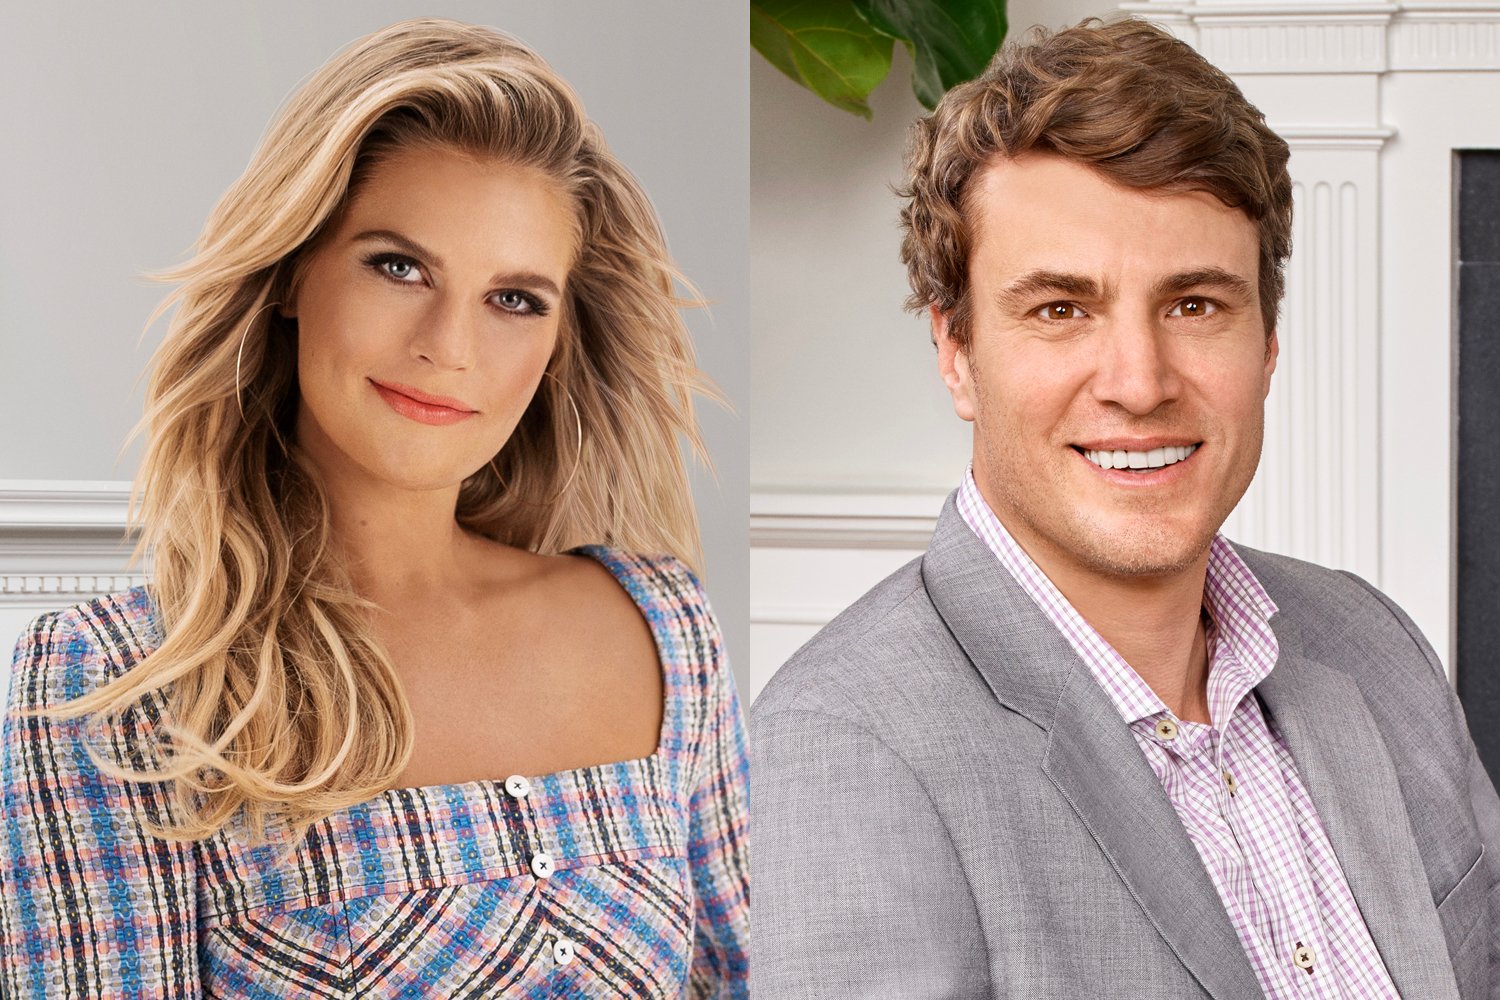 ‘Southern Charm’: Why Shep Rose Finds Madison LeCroy ‘Dangerous’ and ‘Fascinating’